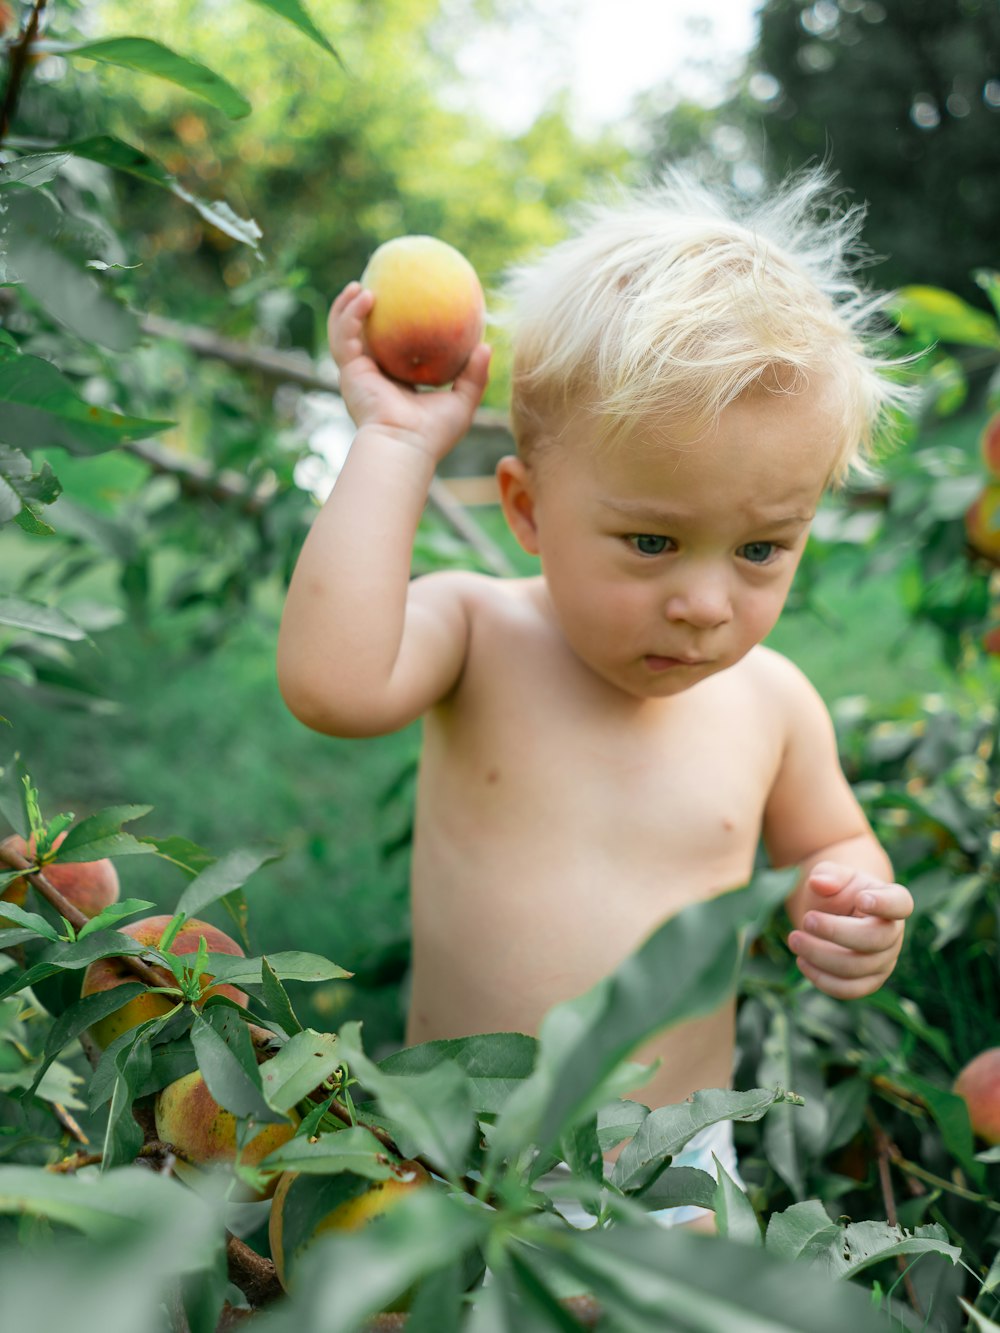 topless baby holding yellow round fruit